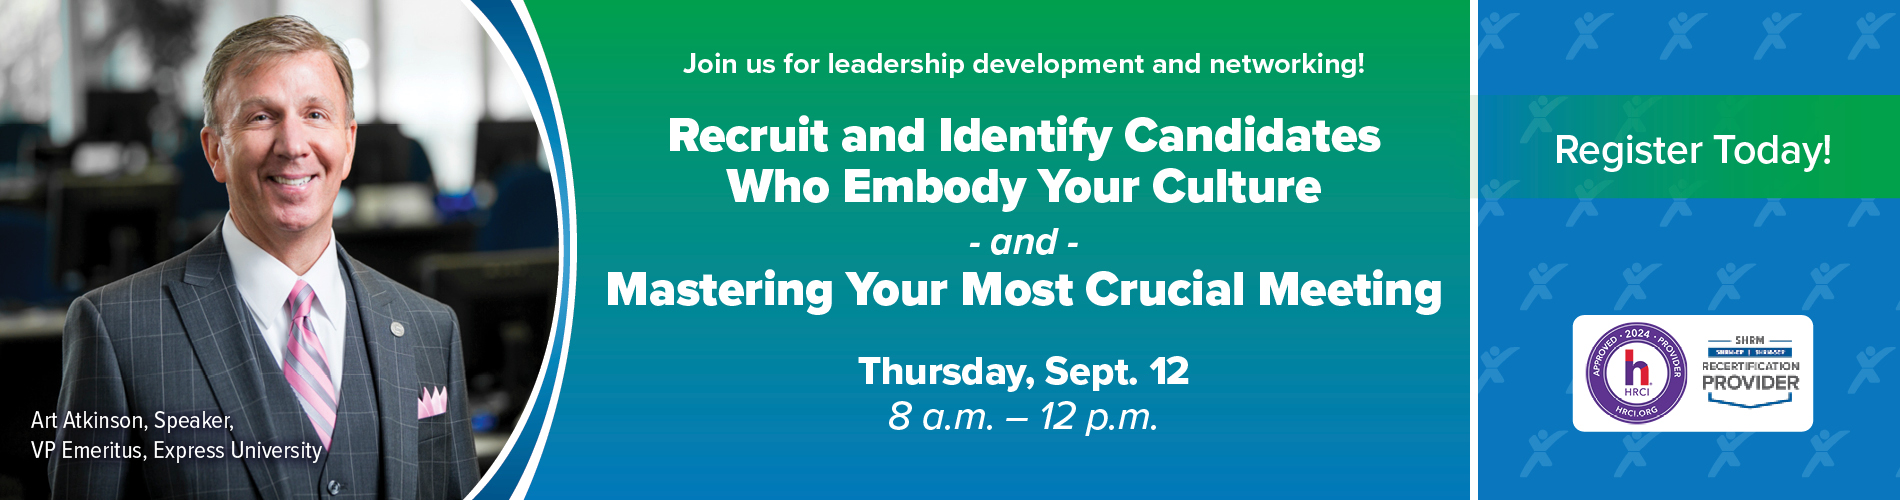 Baldwin County, AL, Leadership Development and Networking Live event Sept 12